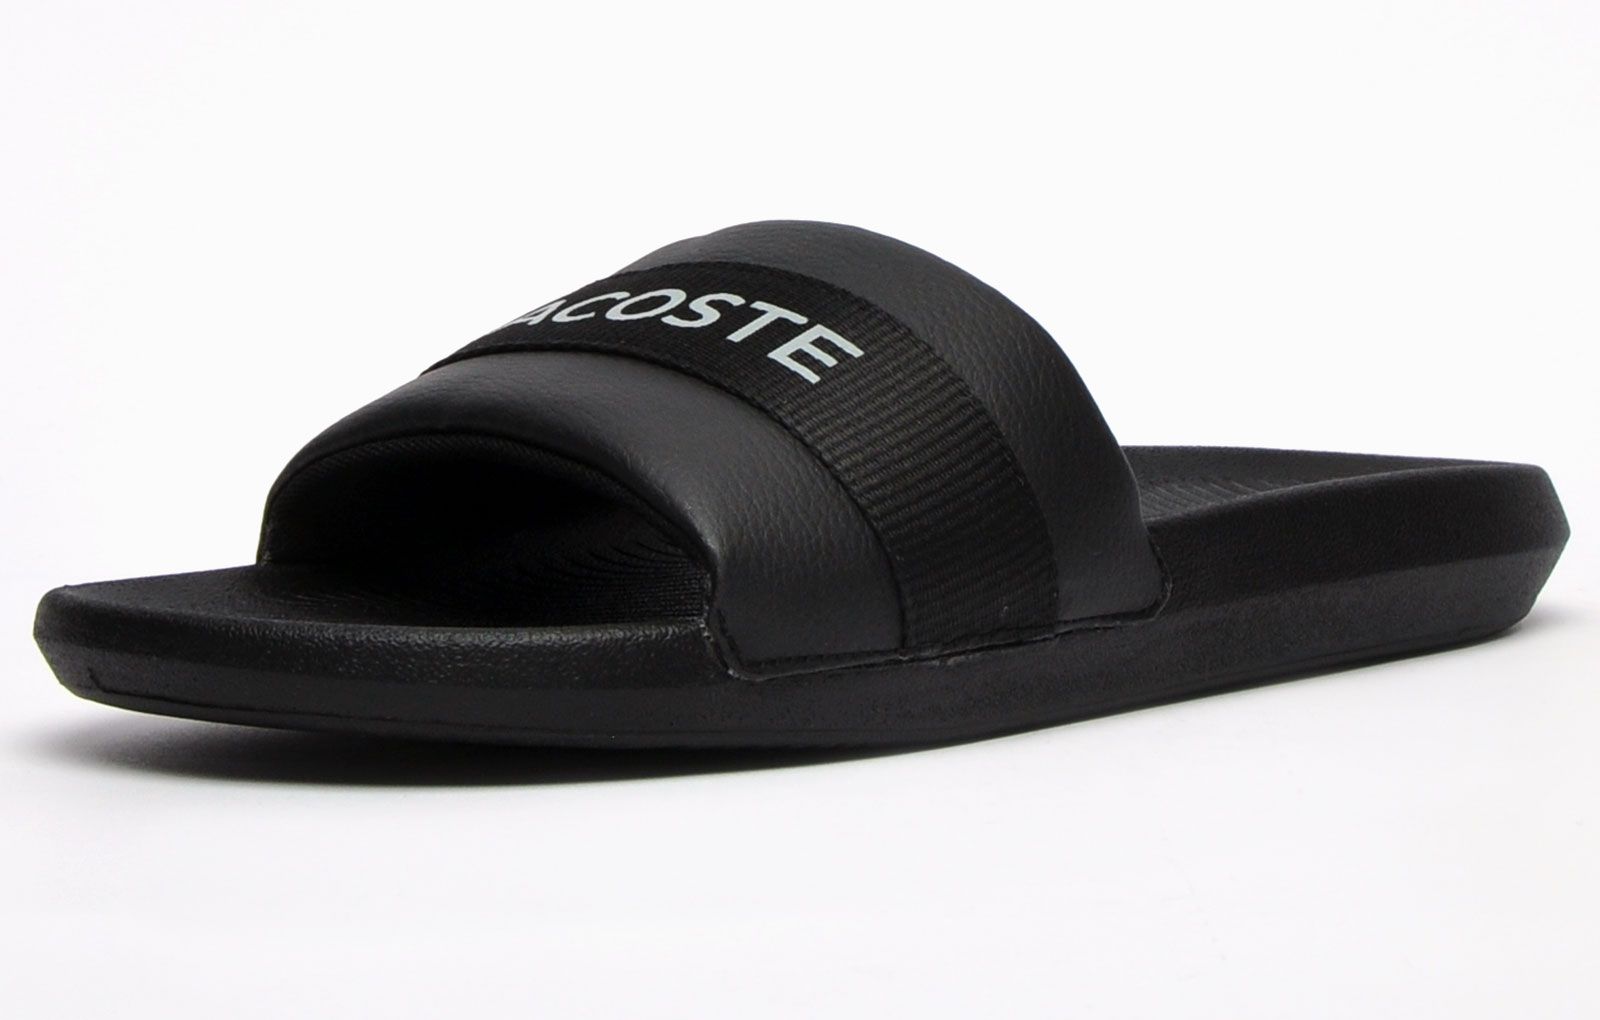 Step into on trend summer style with these mensCroco Slides from Lacoste. In a classic colourway, these designer sandals are delivered in a smooth synthetic upper with textile band stripe detailing across the forefoot foot strap. The super comfy moulded footbed delivers the perfect fit and feel while the grippy outsole will keep you sure and safe around the pool or in the shower. These designer slides are finished with eye catching Lacoste branding throughout just in case you want a sign of approval that youre wearing cool on-trend style this summer season 
 
 - Synthetic comfort upper
 - Comfort moulded footbed
 - Single strap construction
 - Grippy outsole
 - Slip on wear
 - Iconic Lacoste branding throughout
 Please Note: These slides are supplied poly bagged (without box)
 These Lacoste Slides are sold as B grades which means there may be some very slight cosmetic issues on the shoe and they come in a poly bag. There could be occasional issues with wrong swing tags being allocated to wrong shoes by Lacoste themselves which could result in some size confusion but you must take the size IN THE SHOE as the size that the shoe actually is ( not what is on the tag ). We have checked most of the shoes and in our opinion,all are practically perfect without any blemishes on them at all and in essence if the shoes did not have the letter B denoted on the swing tag you would presume these were perfect shoes. All shoes are guaranteed against fair wear and tear and offer a substantial saving against the normal high street price. The overall function or performance of the shoe will not be affected by any minor cosmetic issues. B Grades are original authentic products released by the brand manufacturer with their approval at greatly reduced prices. If you are unhappy with your purchase, we will be more than happy to take the shoes back from you and issue a full refund